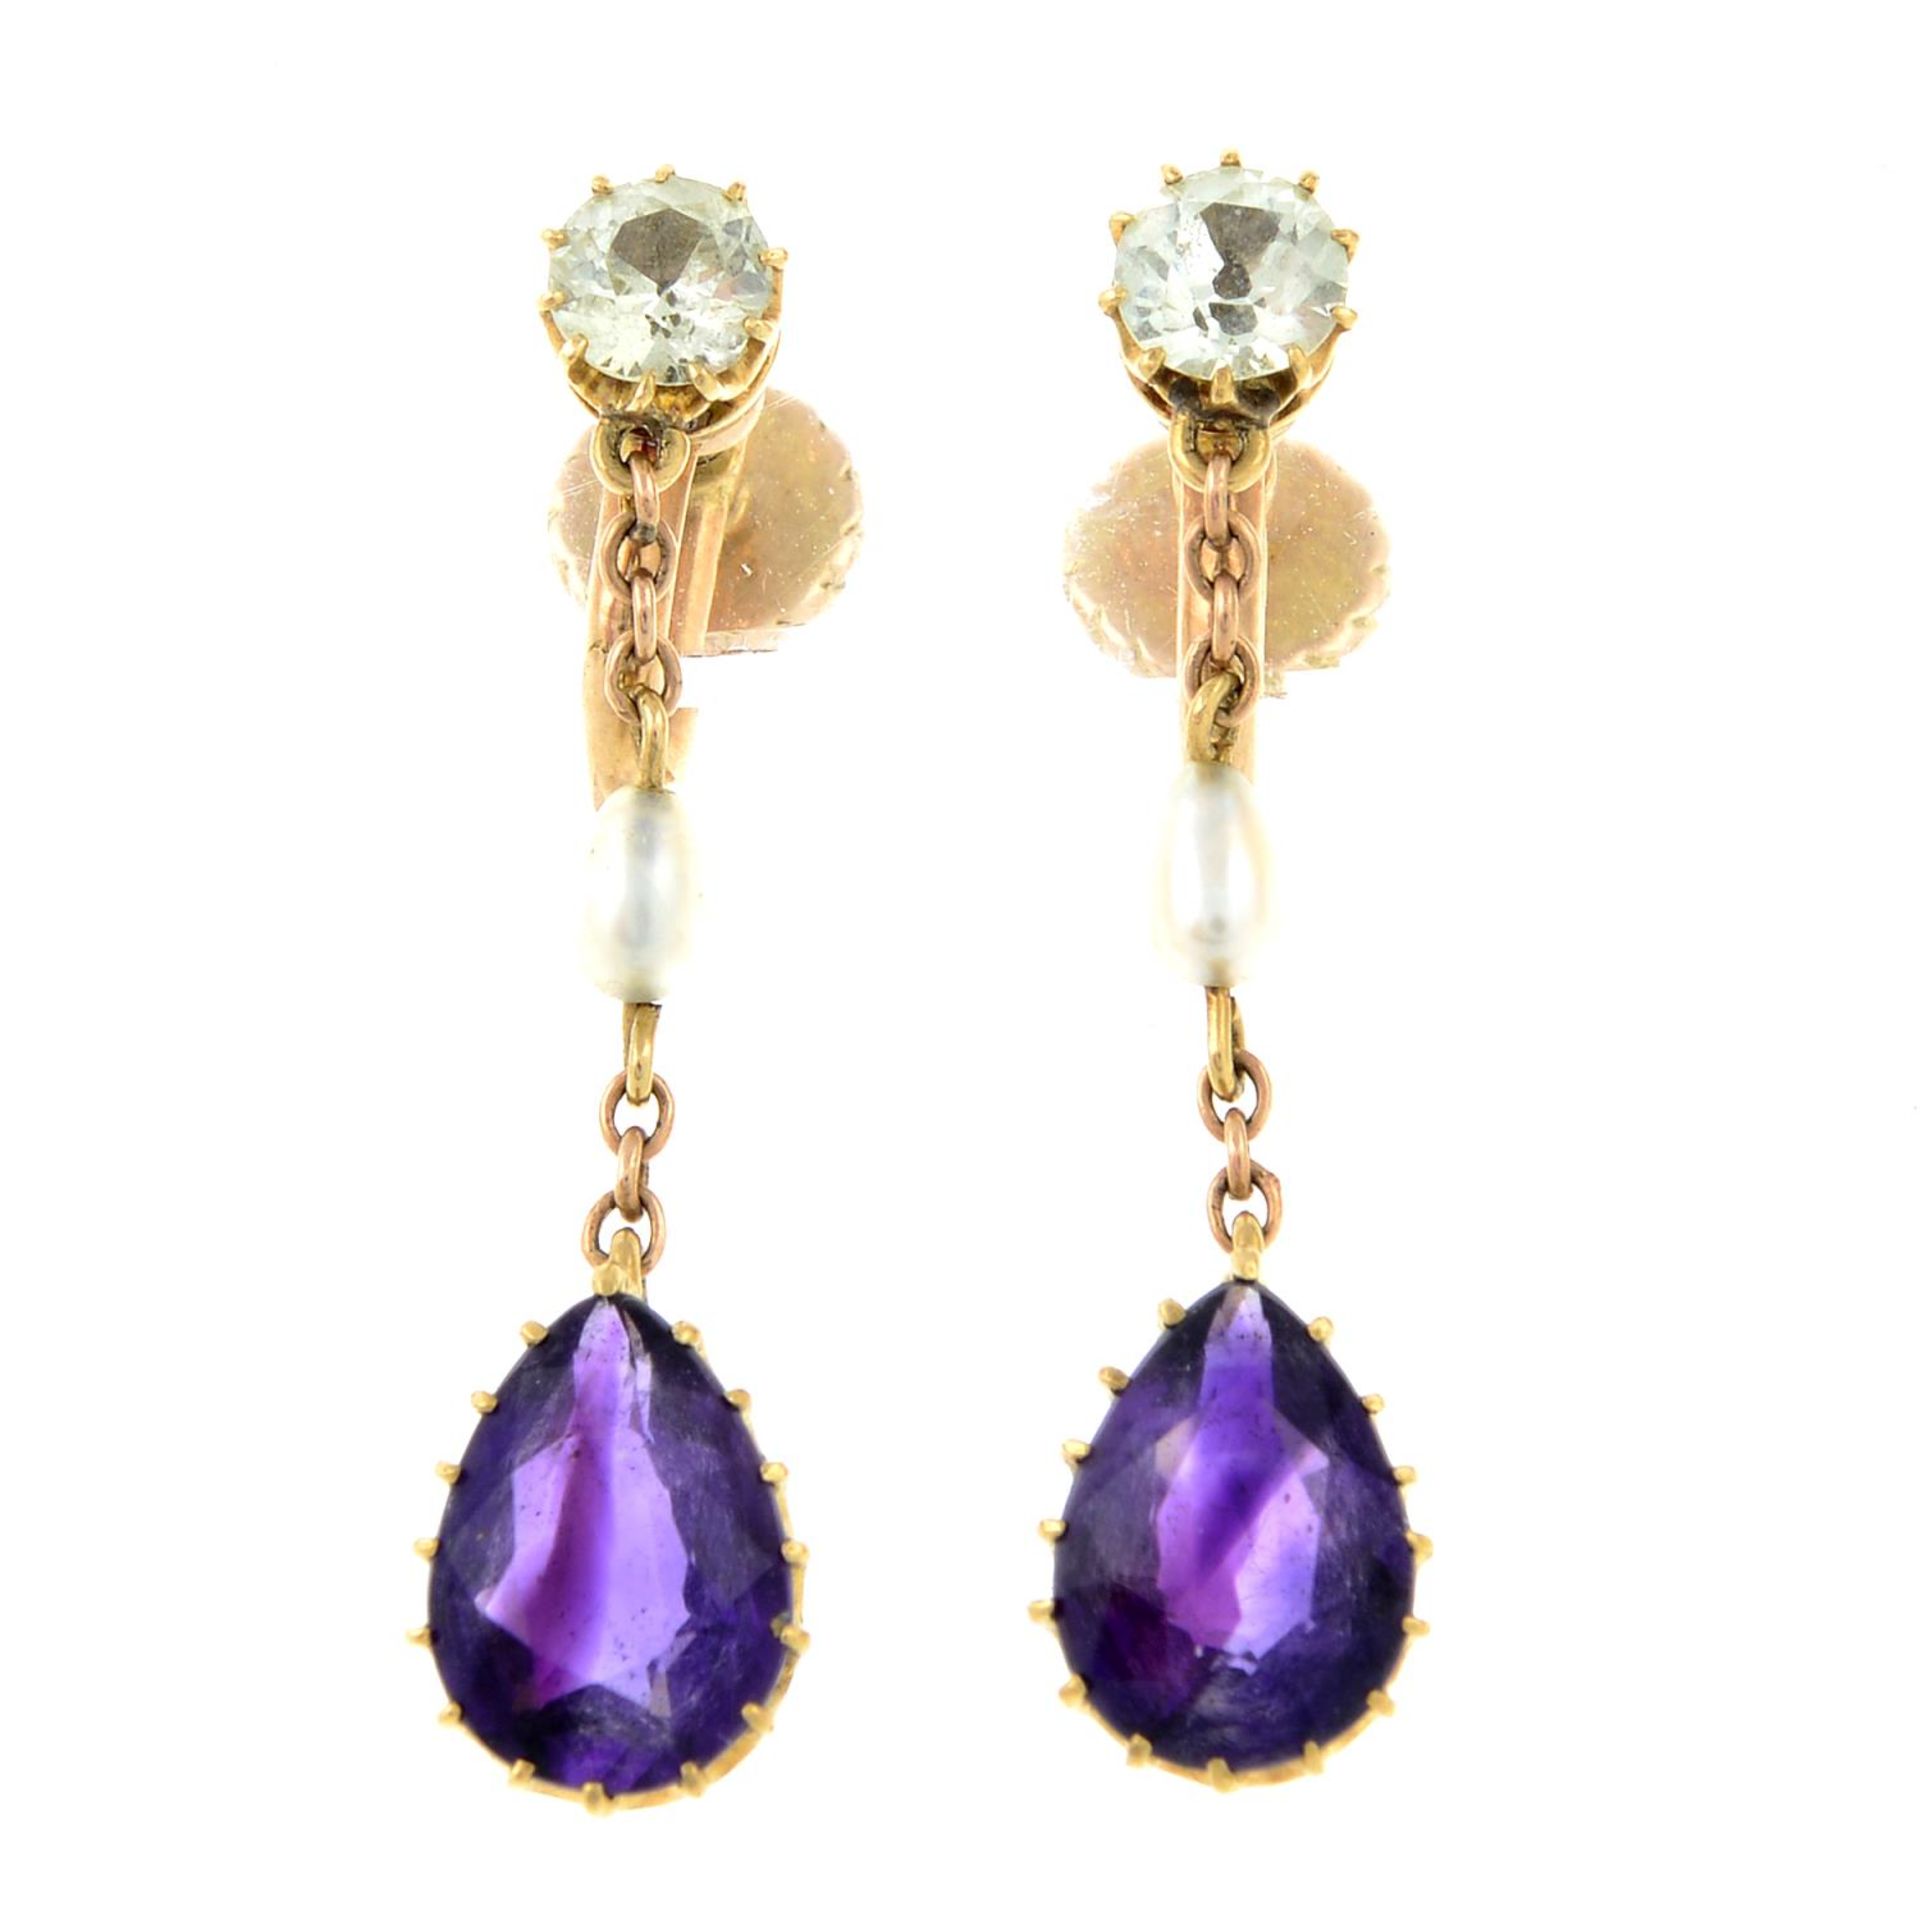 A pair of early 20th century gold amethyst, chrysoberyl and seed pearl earrings.Length 2.7cms.